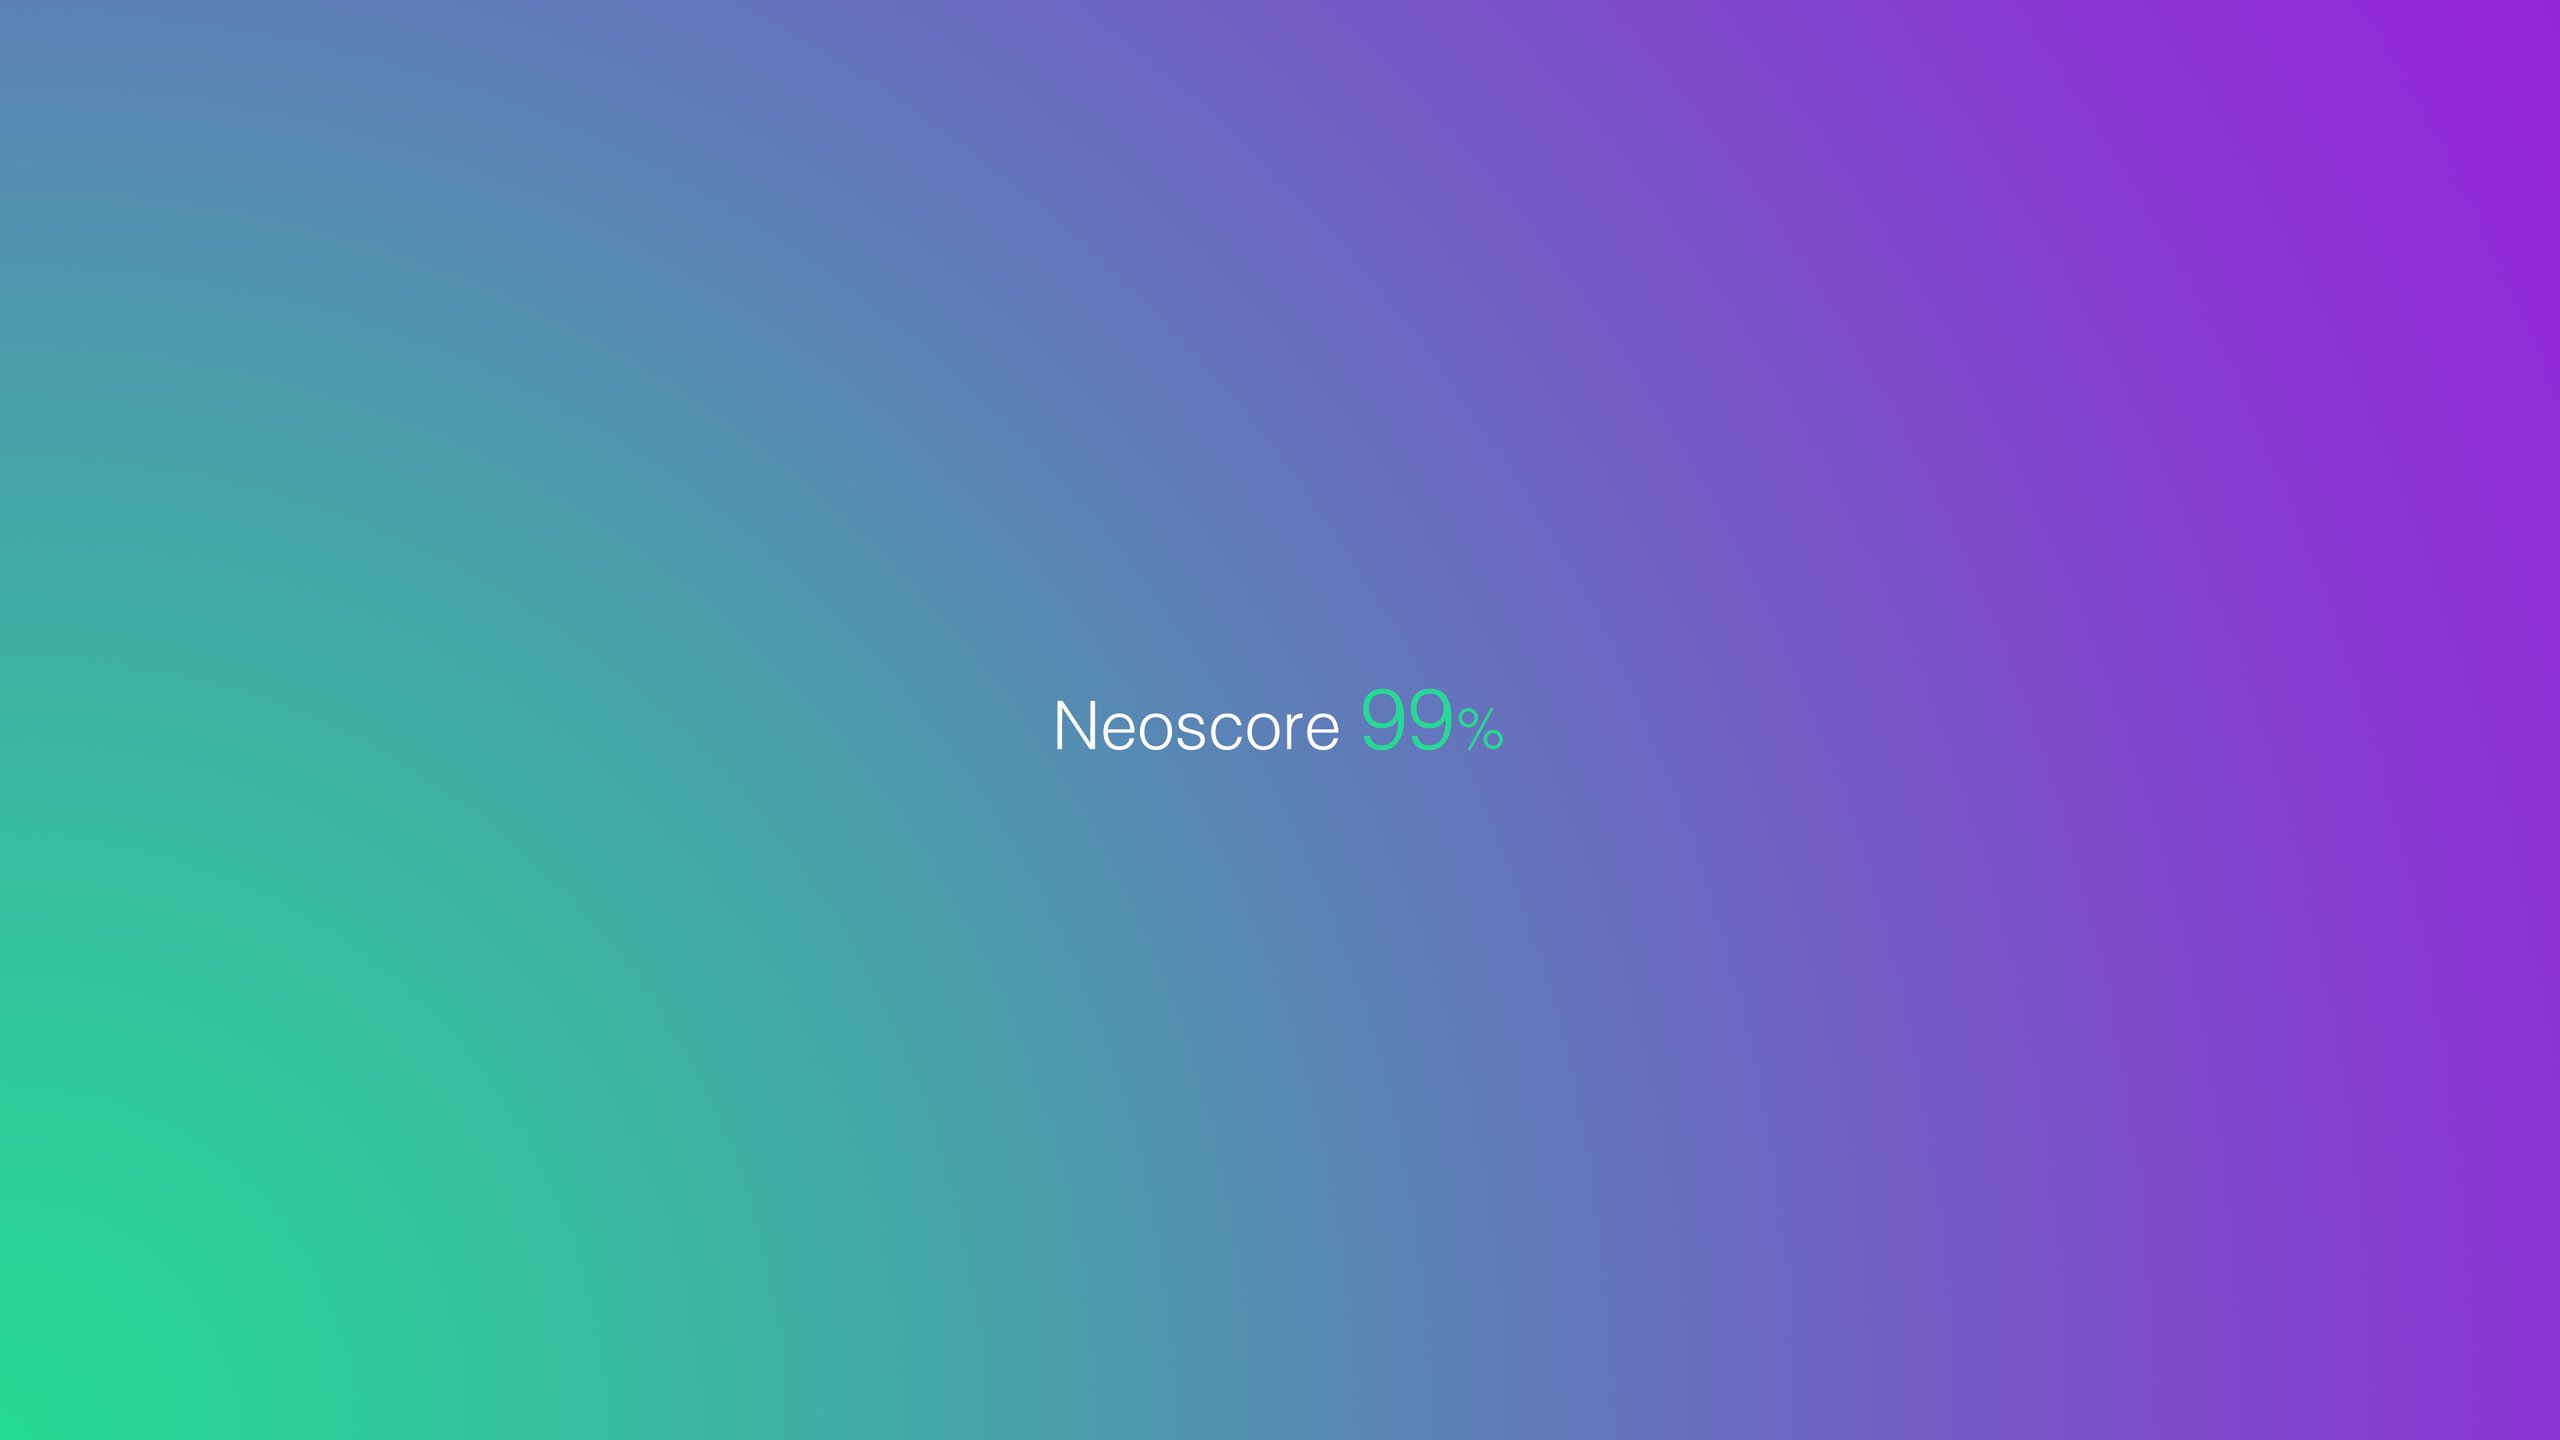 Post Banner for Introducing Neoscore on Neofiliac